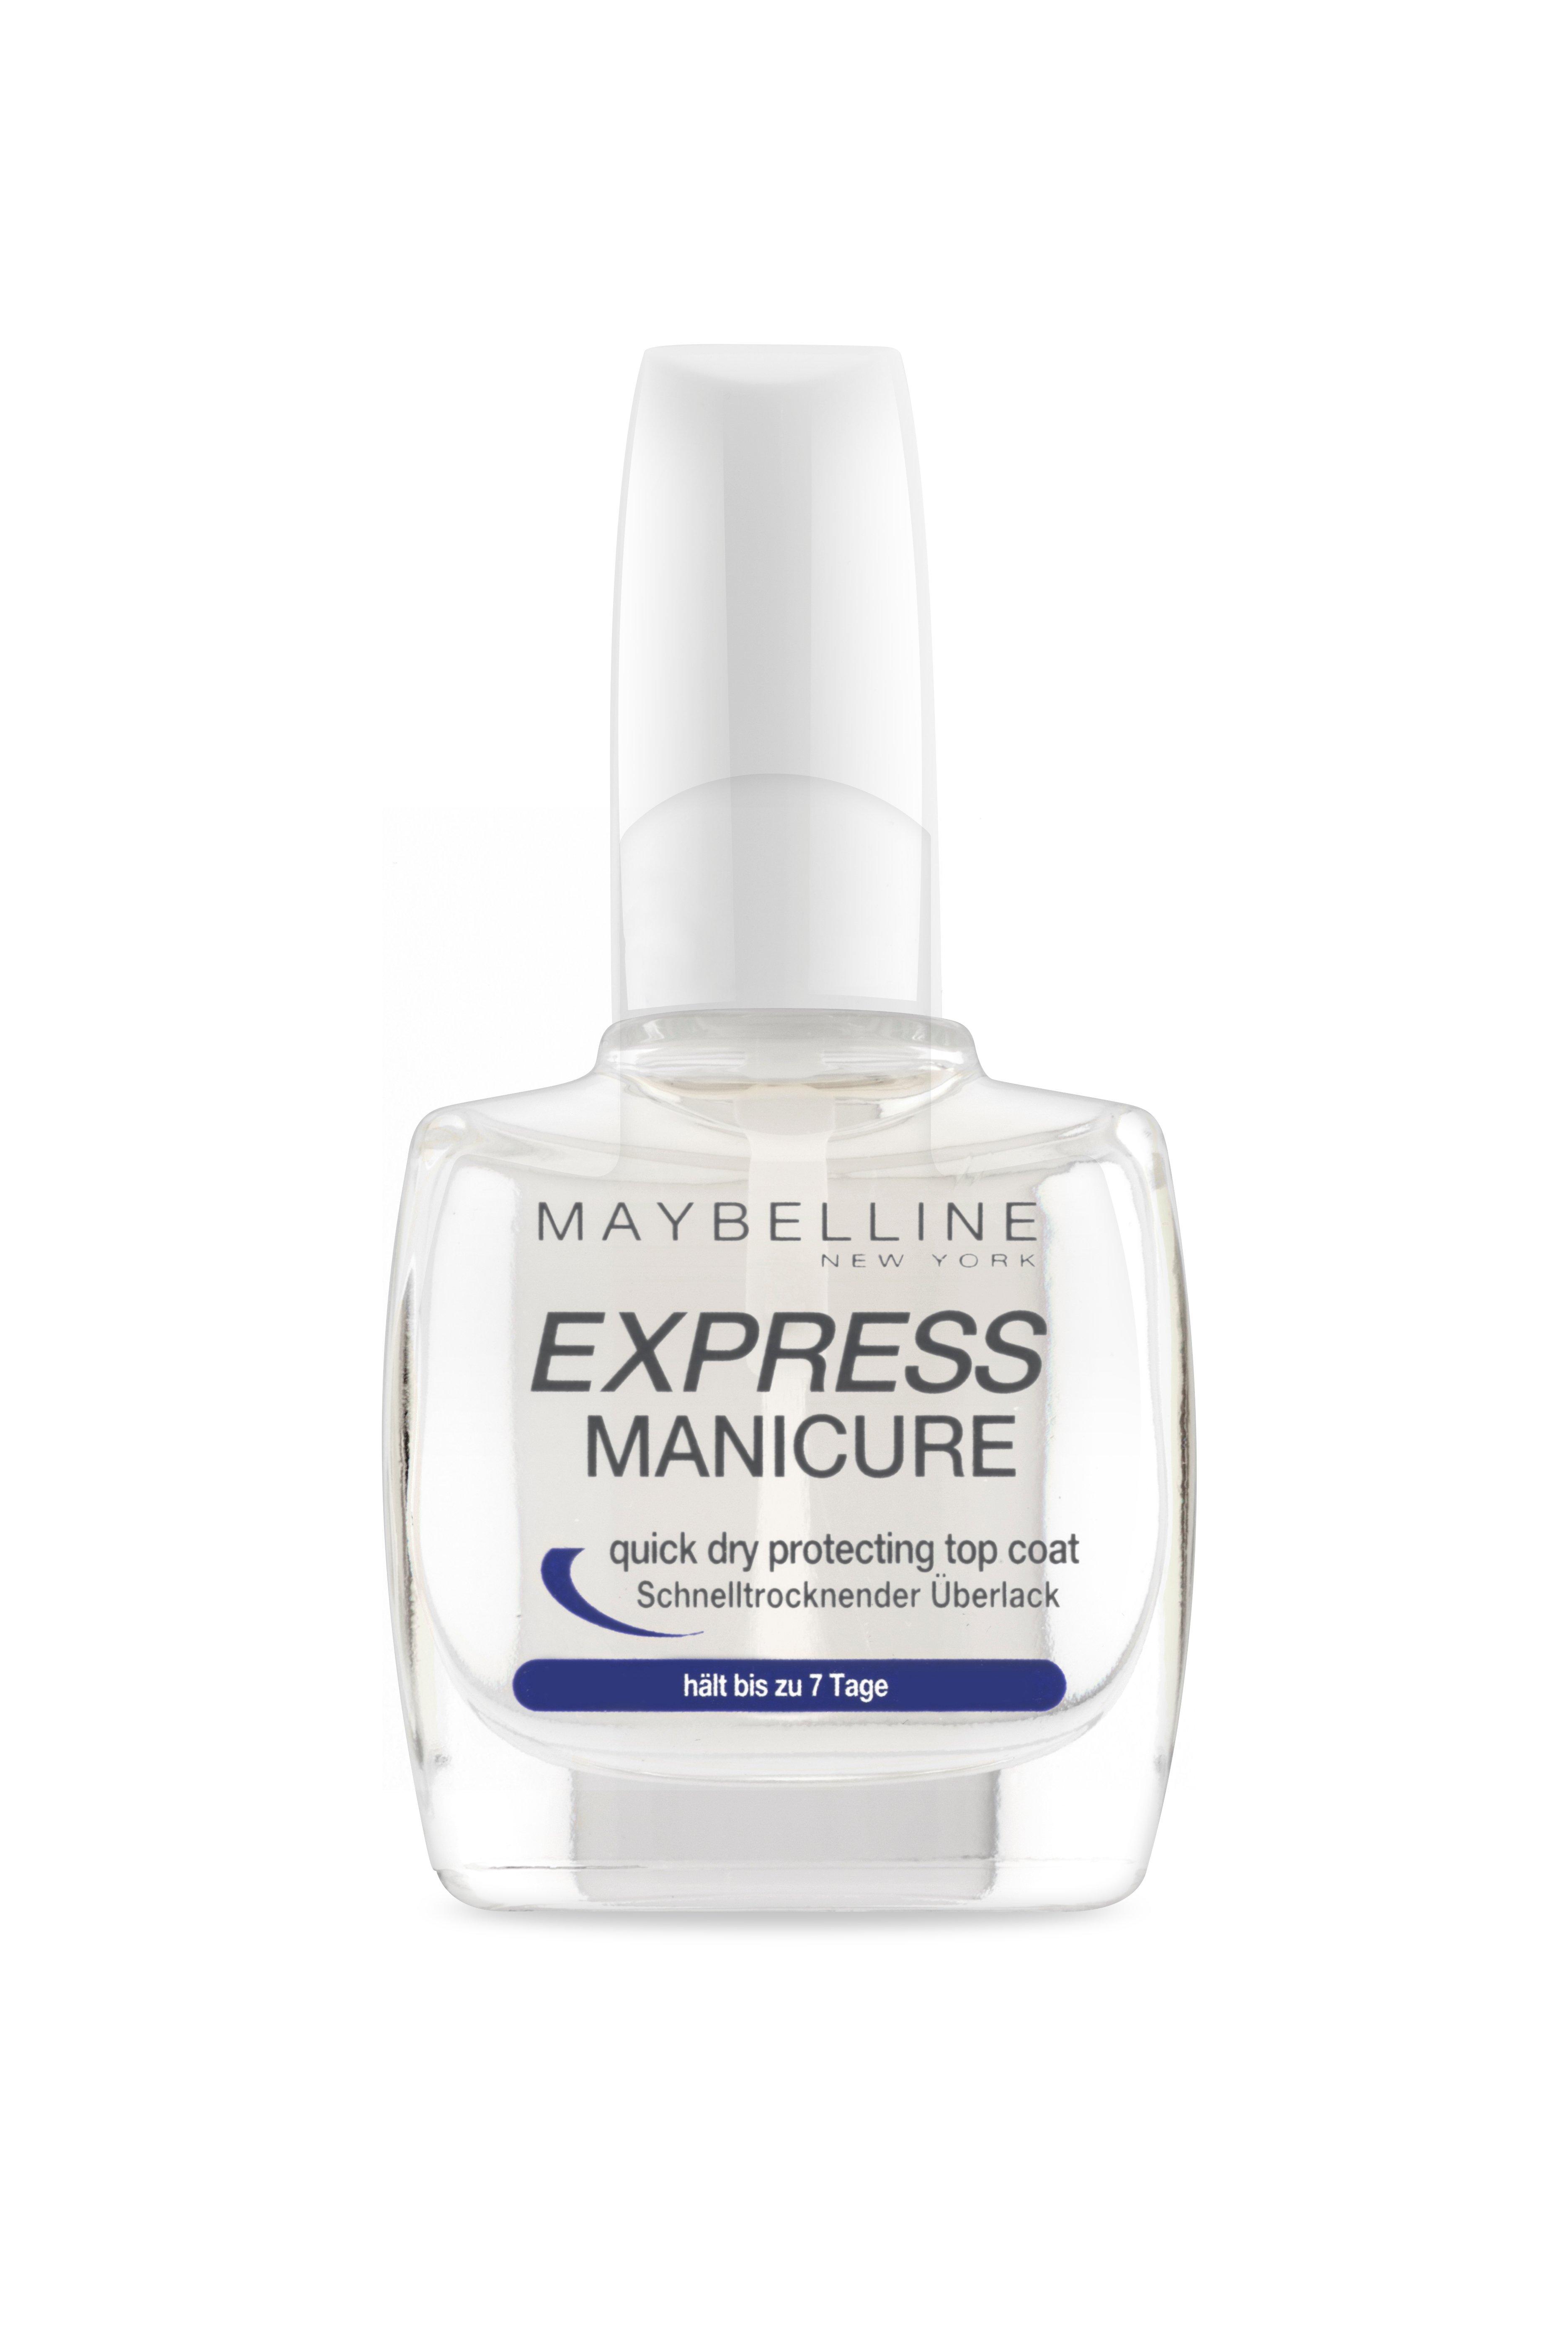 MAYBELLINE Salon Manicure Nail Protection - | MANOR Coat kaufen online Top